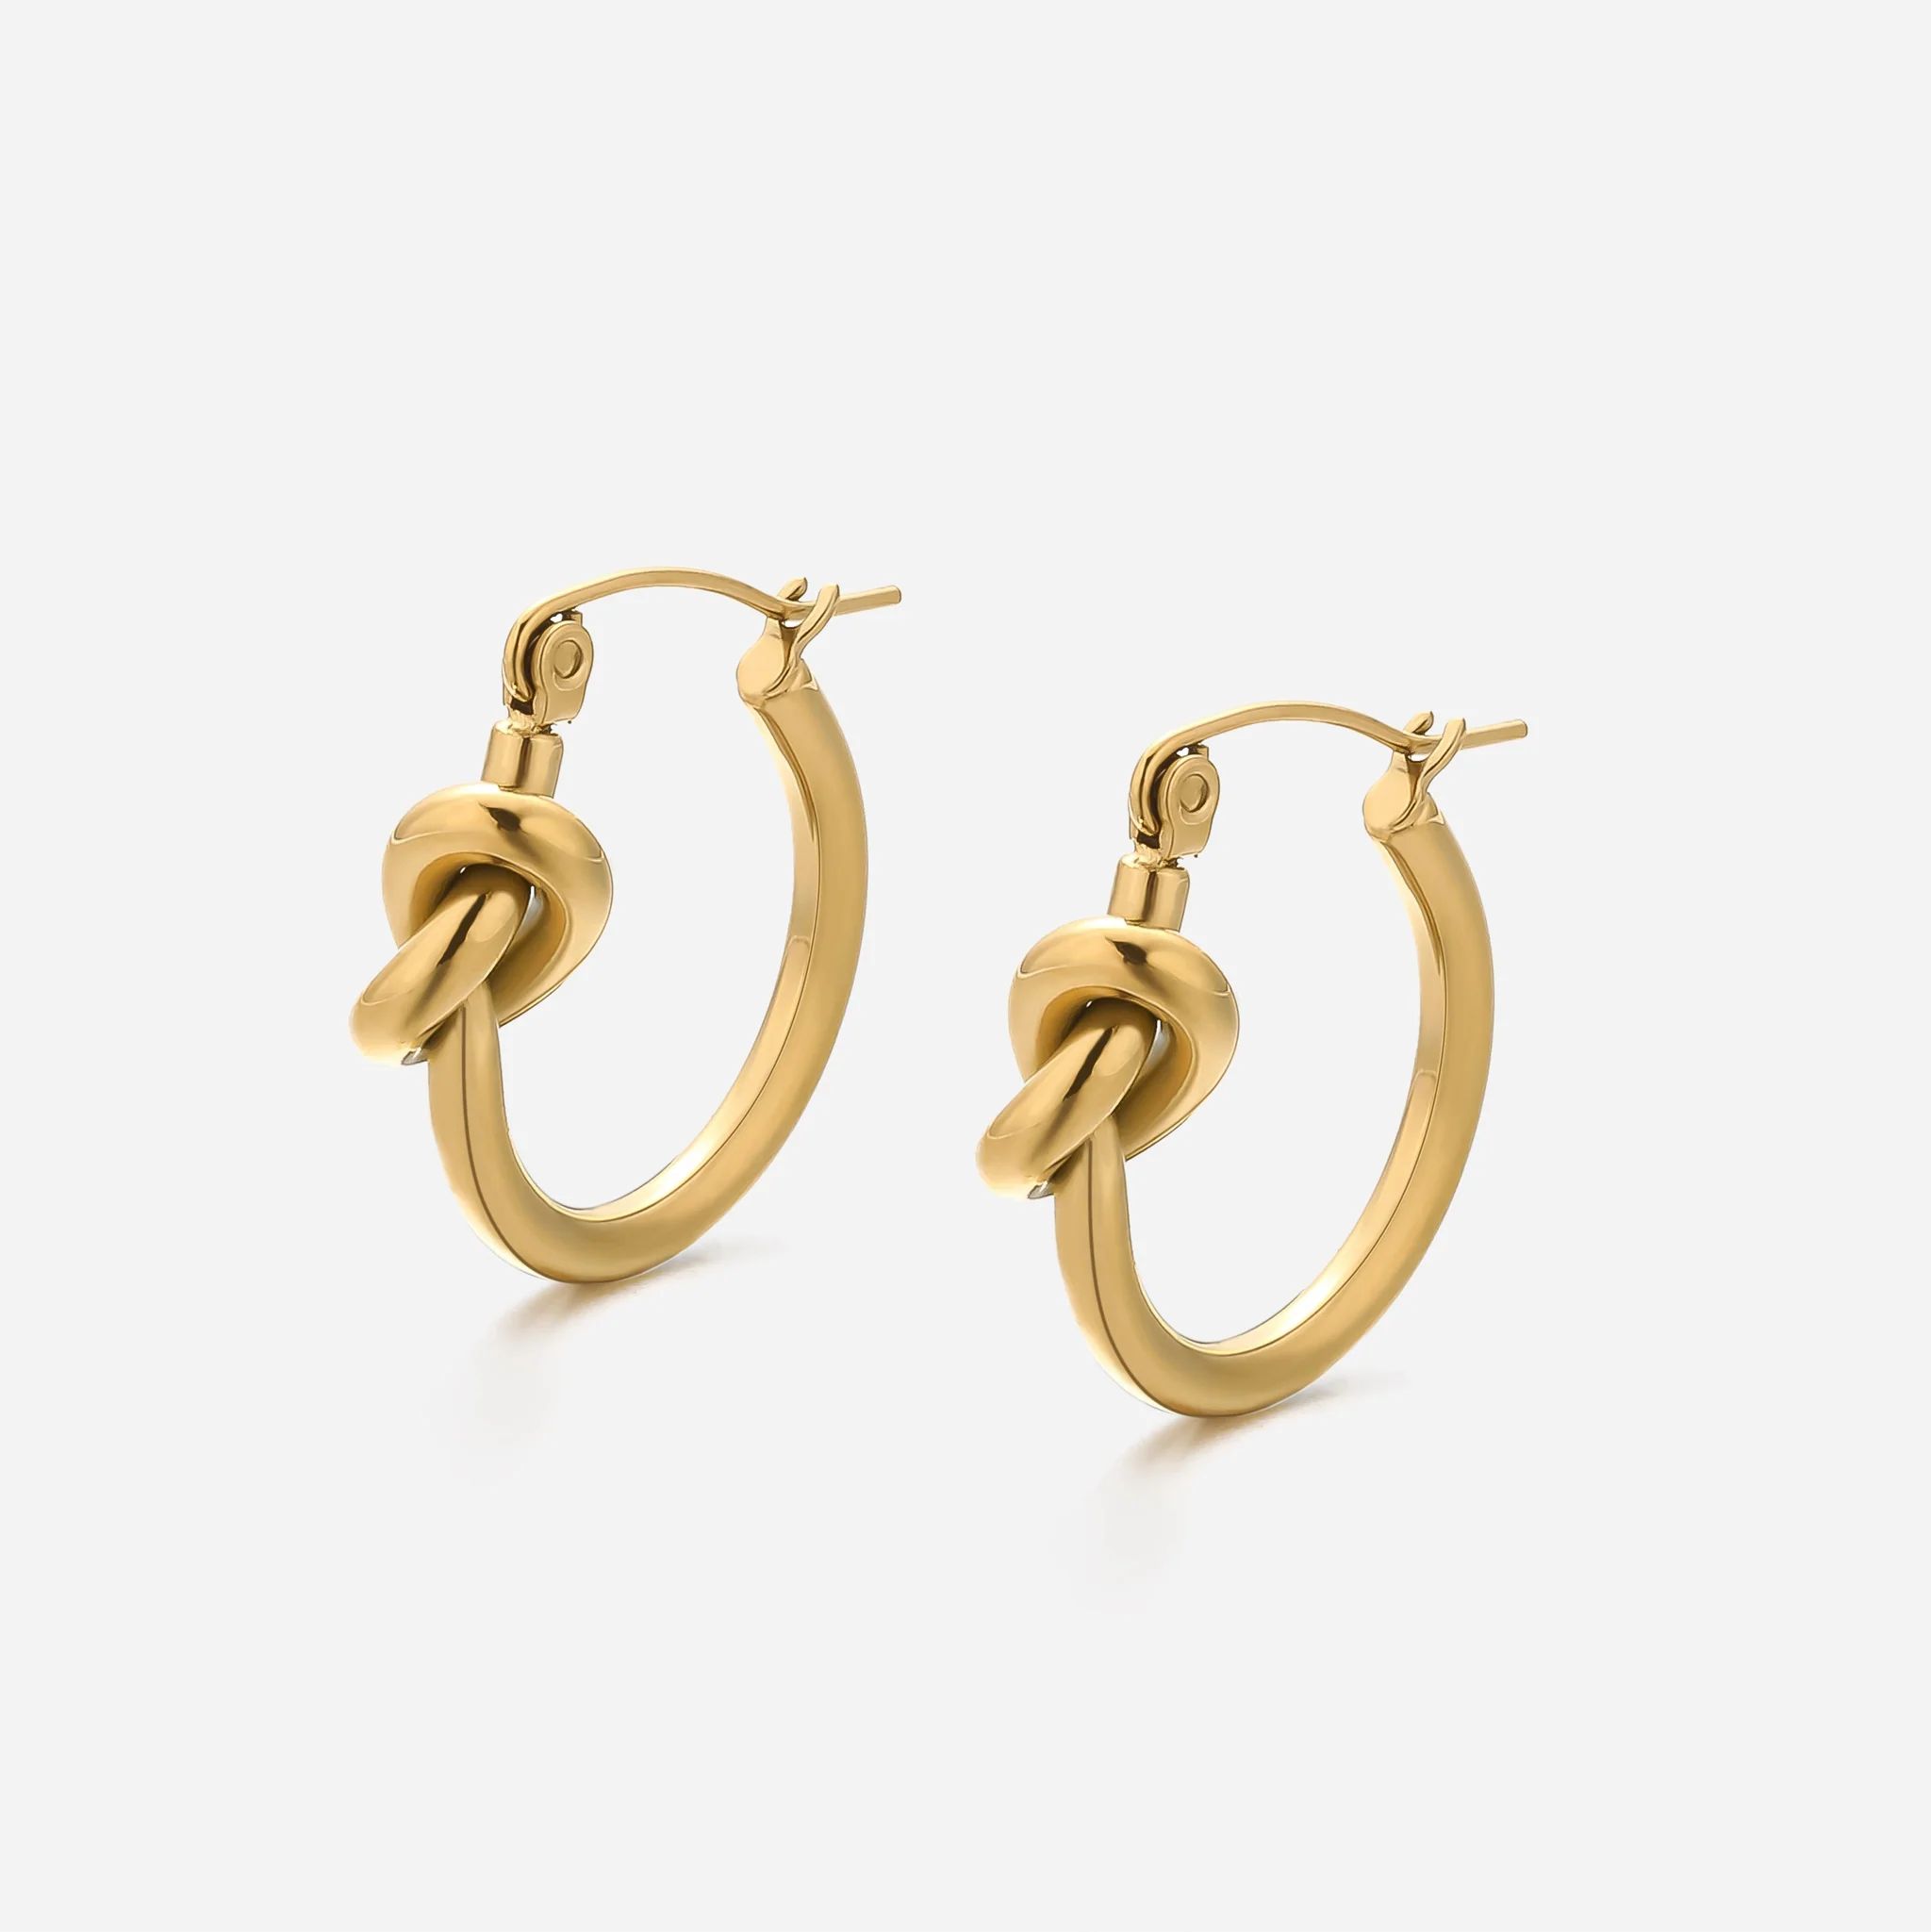 Harlow Knotted Hoop Earrings | Victoria Emerson